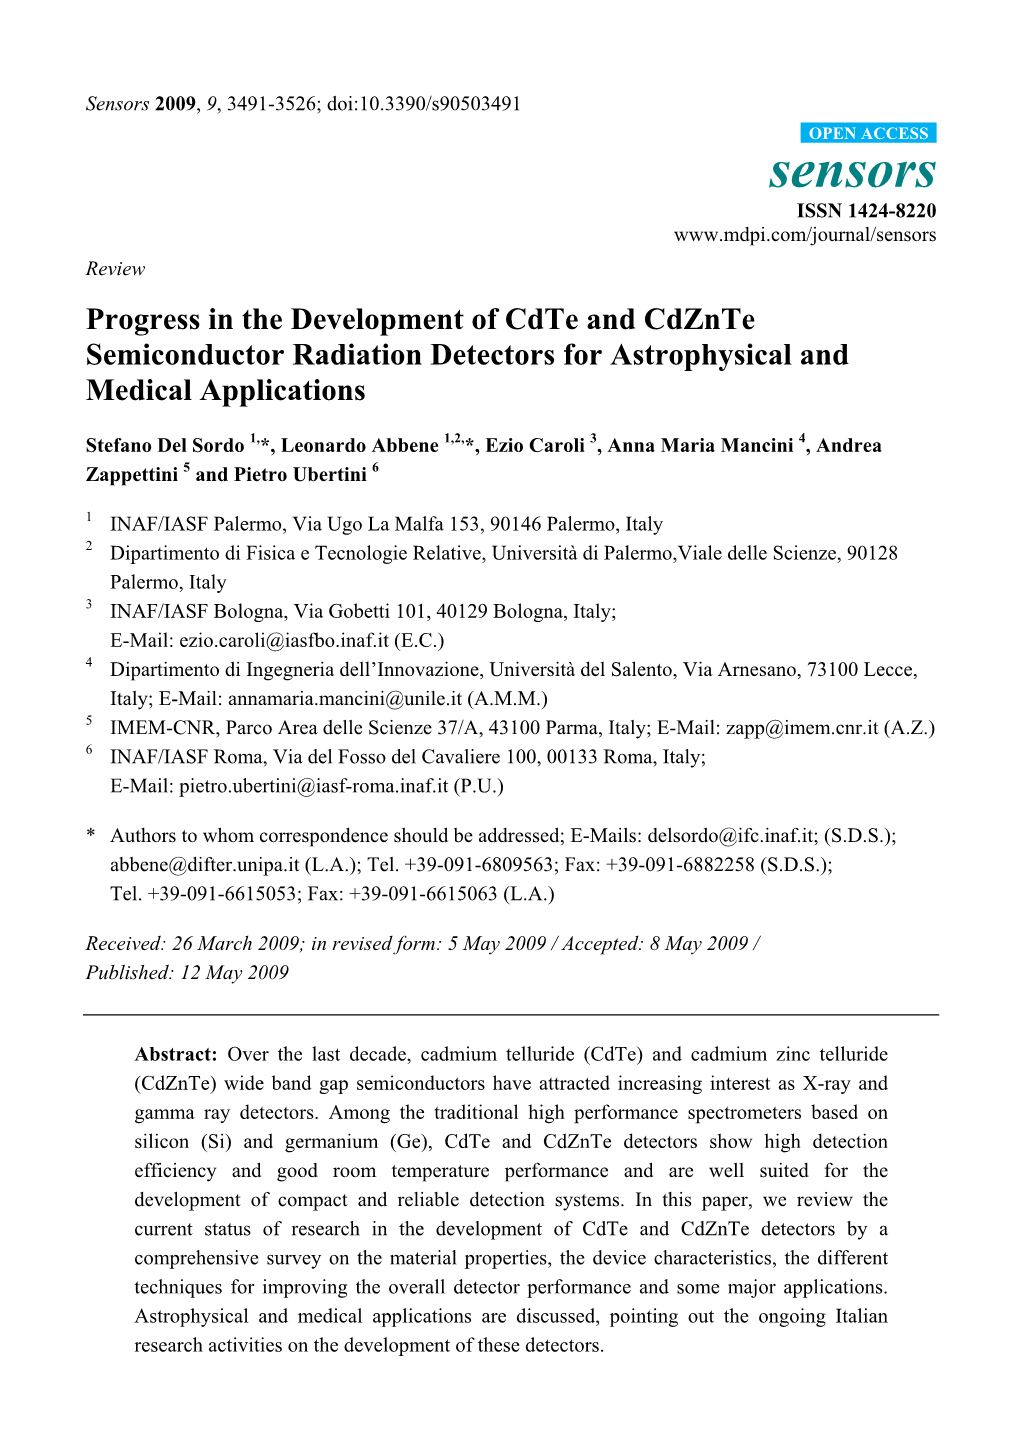 Progress in the Development of Cdte and Cdznte Semiconductor Radiation Detectors for Astrophysical and Medical Applications